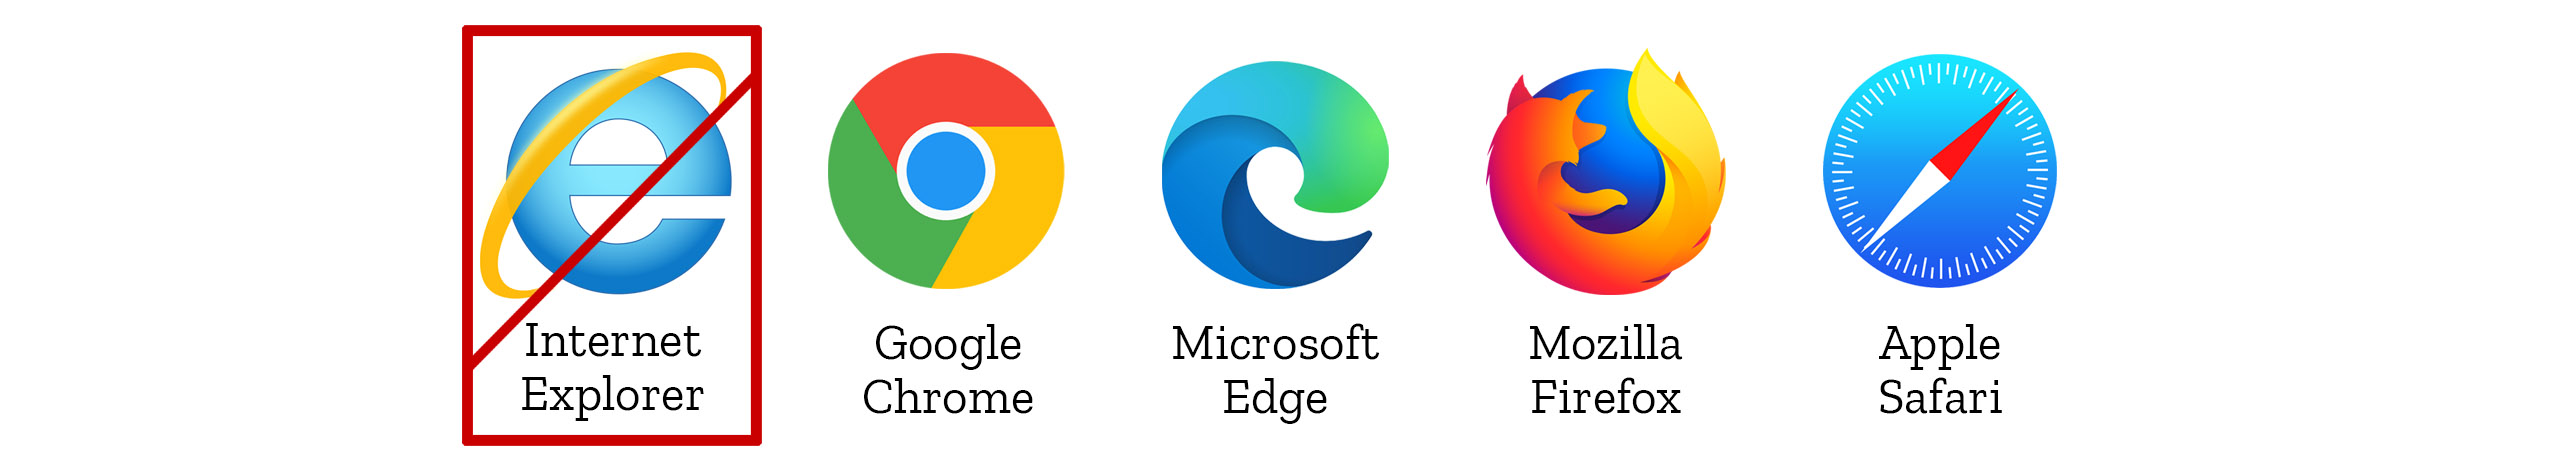 All browser icons but the internet explorer logo has a red slash going through it.